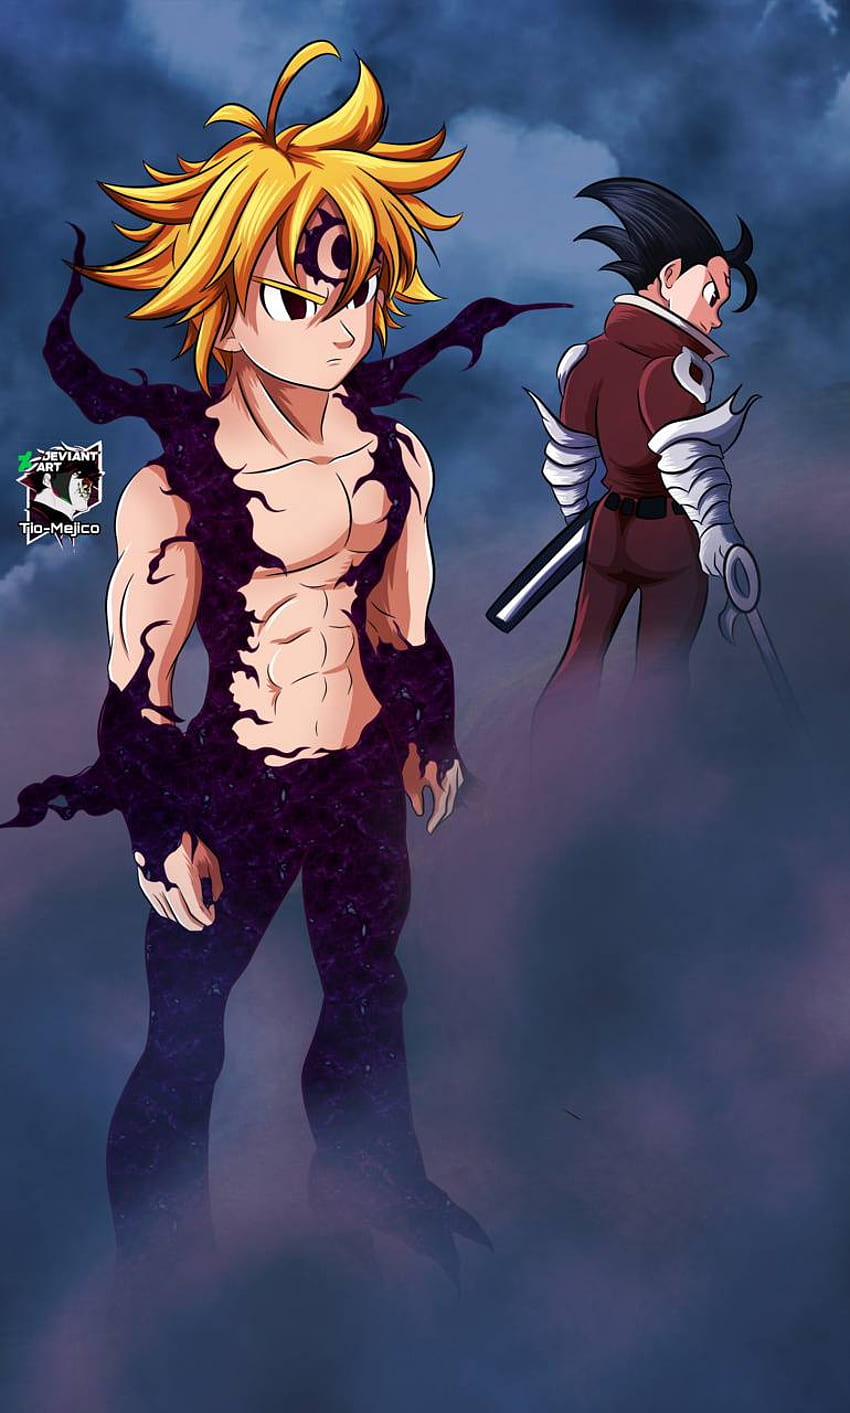 Wallpaper ID 448283  Anime The Seven Deadly Sins Phone Wallpaper Zeldris  The Seven Deadly Sins Tattoo 720x1280 free download